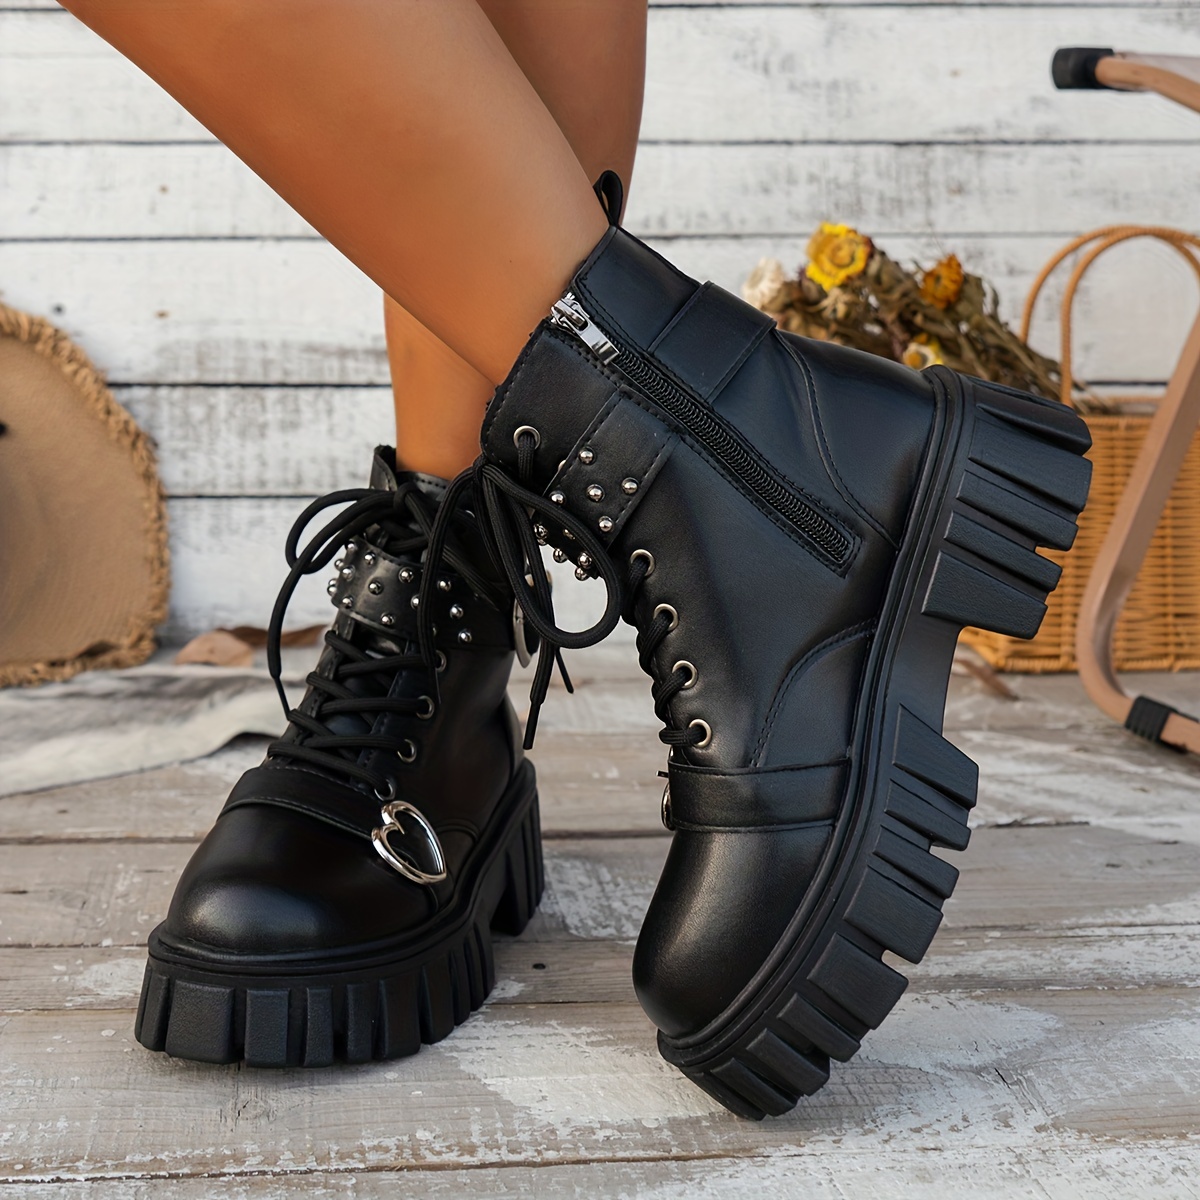 Women's Gothic Platform Ankle Boots, Round Toe Lace Up Buckle